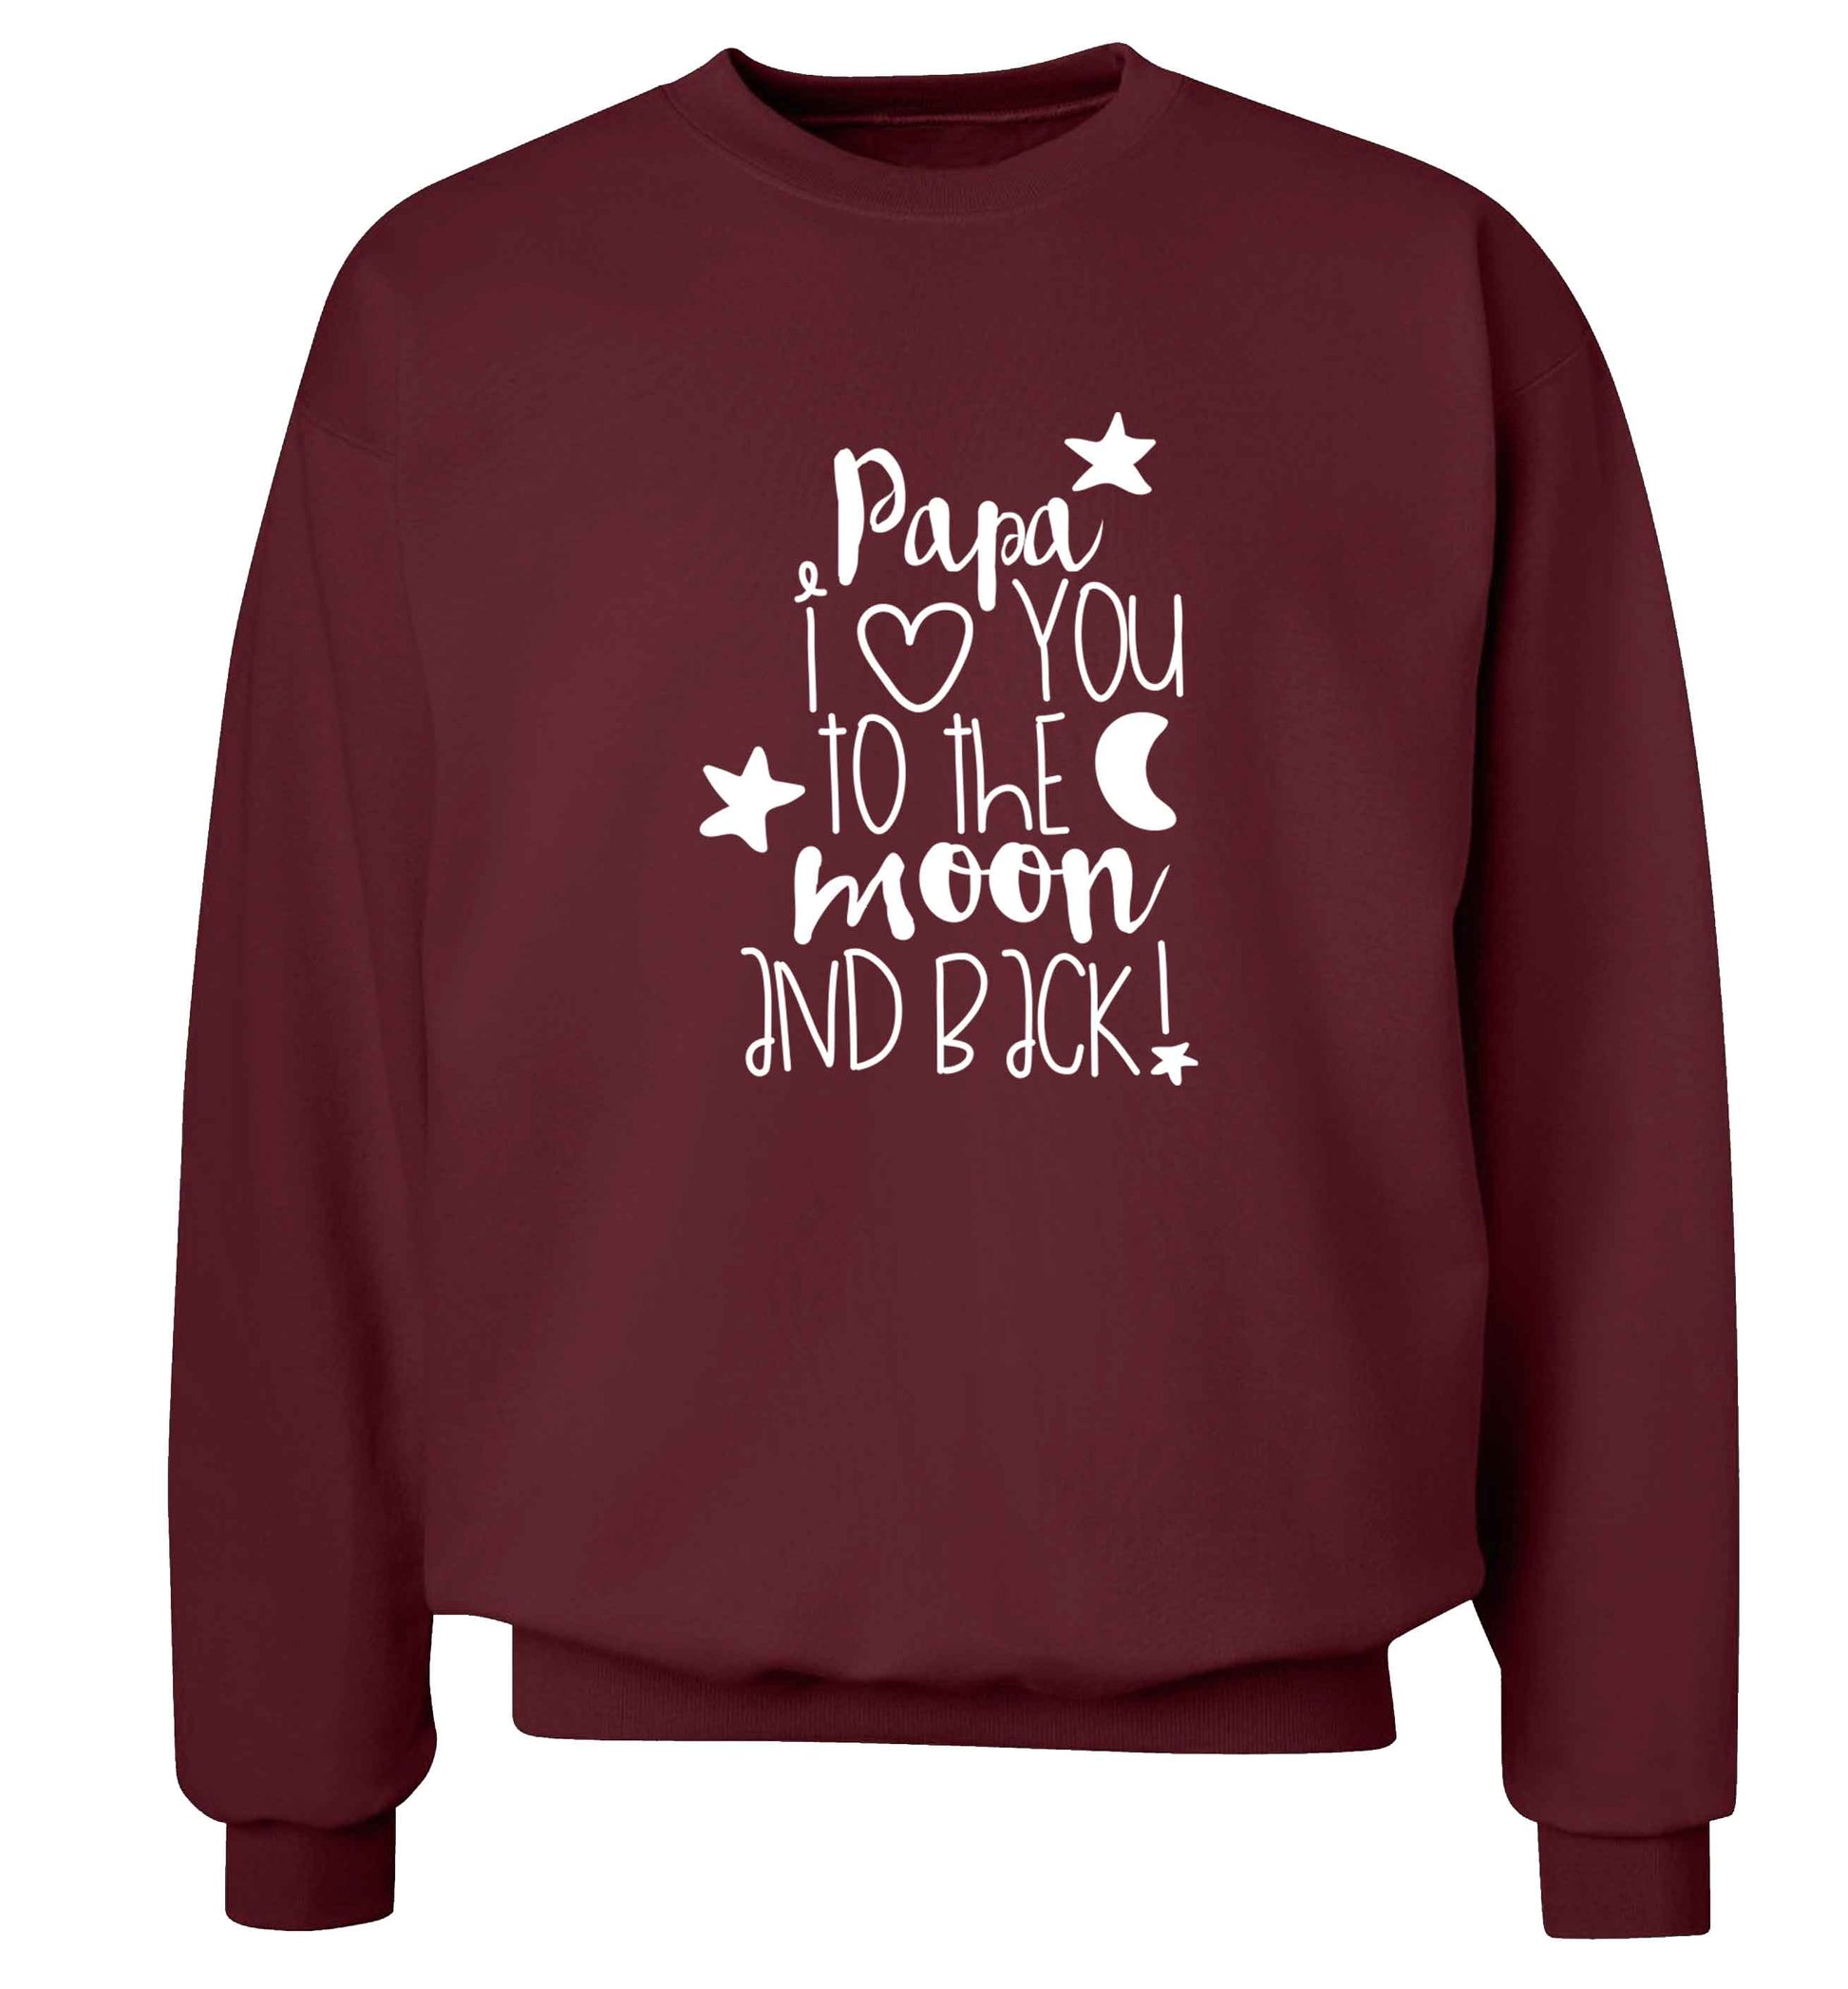 Papa I love you to the moon and back adult's unisex maroon sweater 2XL